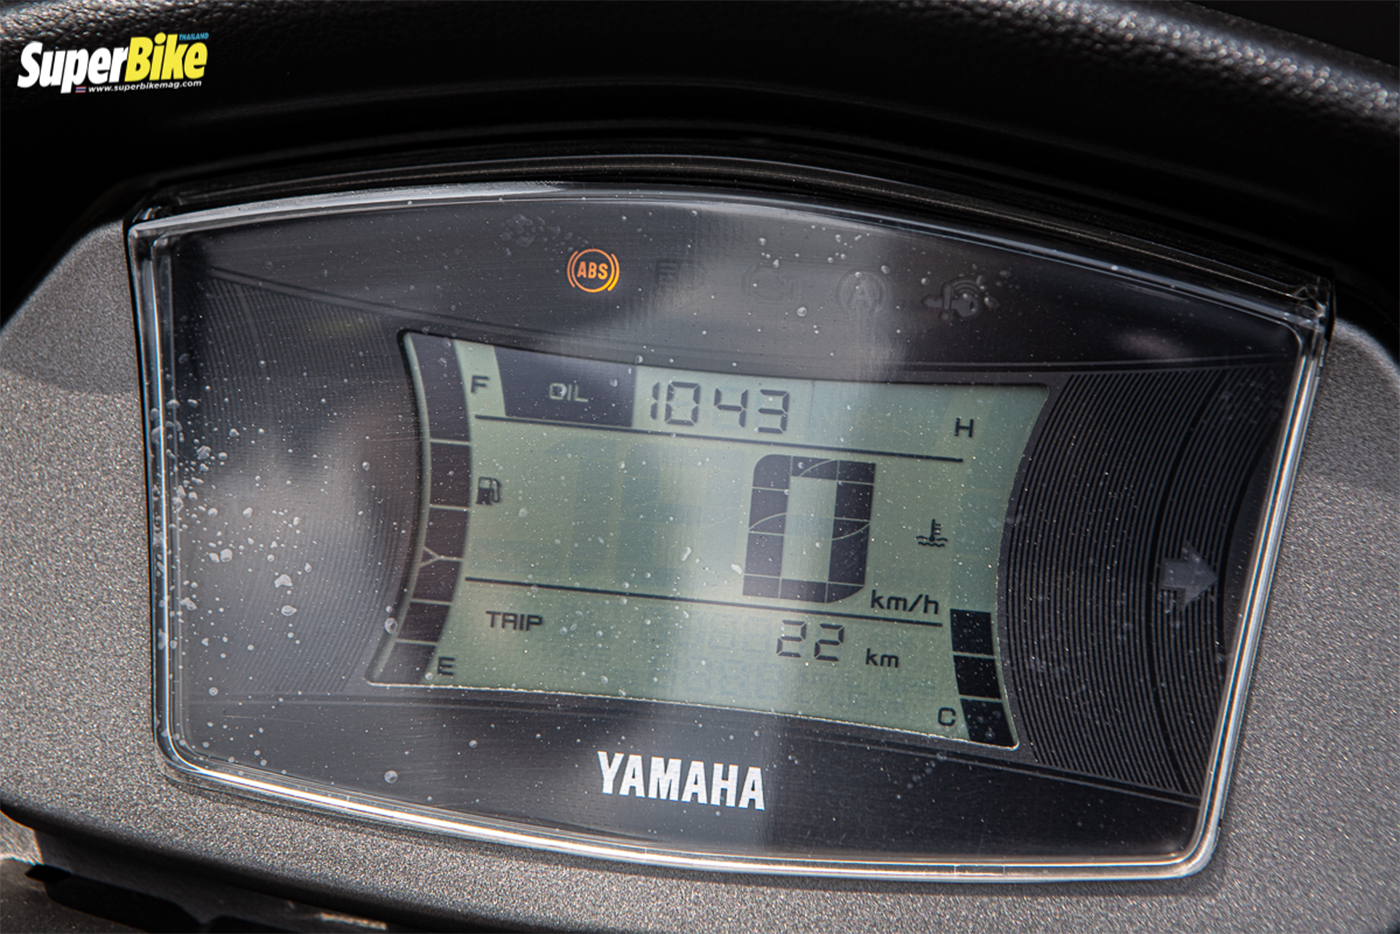 Comparison of Yamaha NMax 155 ABS 2020 and its predecessor yamaha-nmax-155-abs-2020-4.jpg